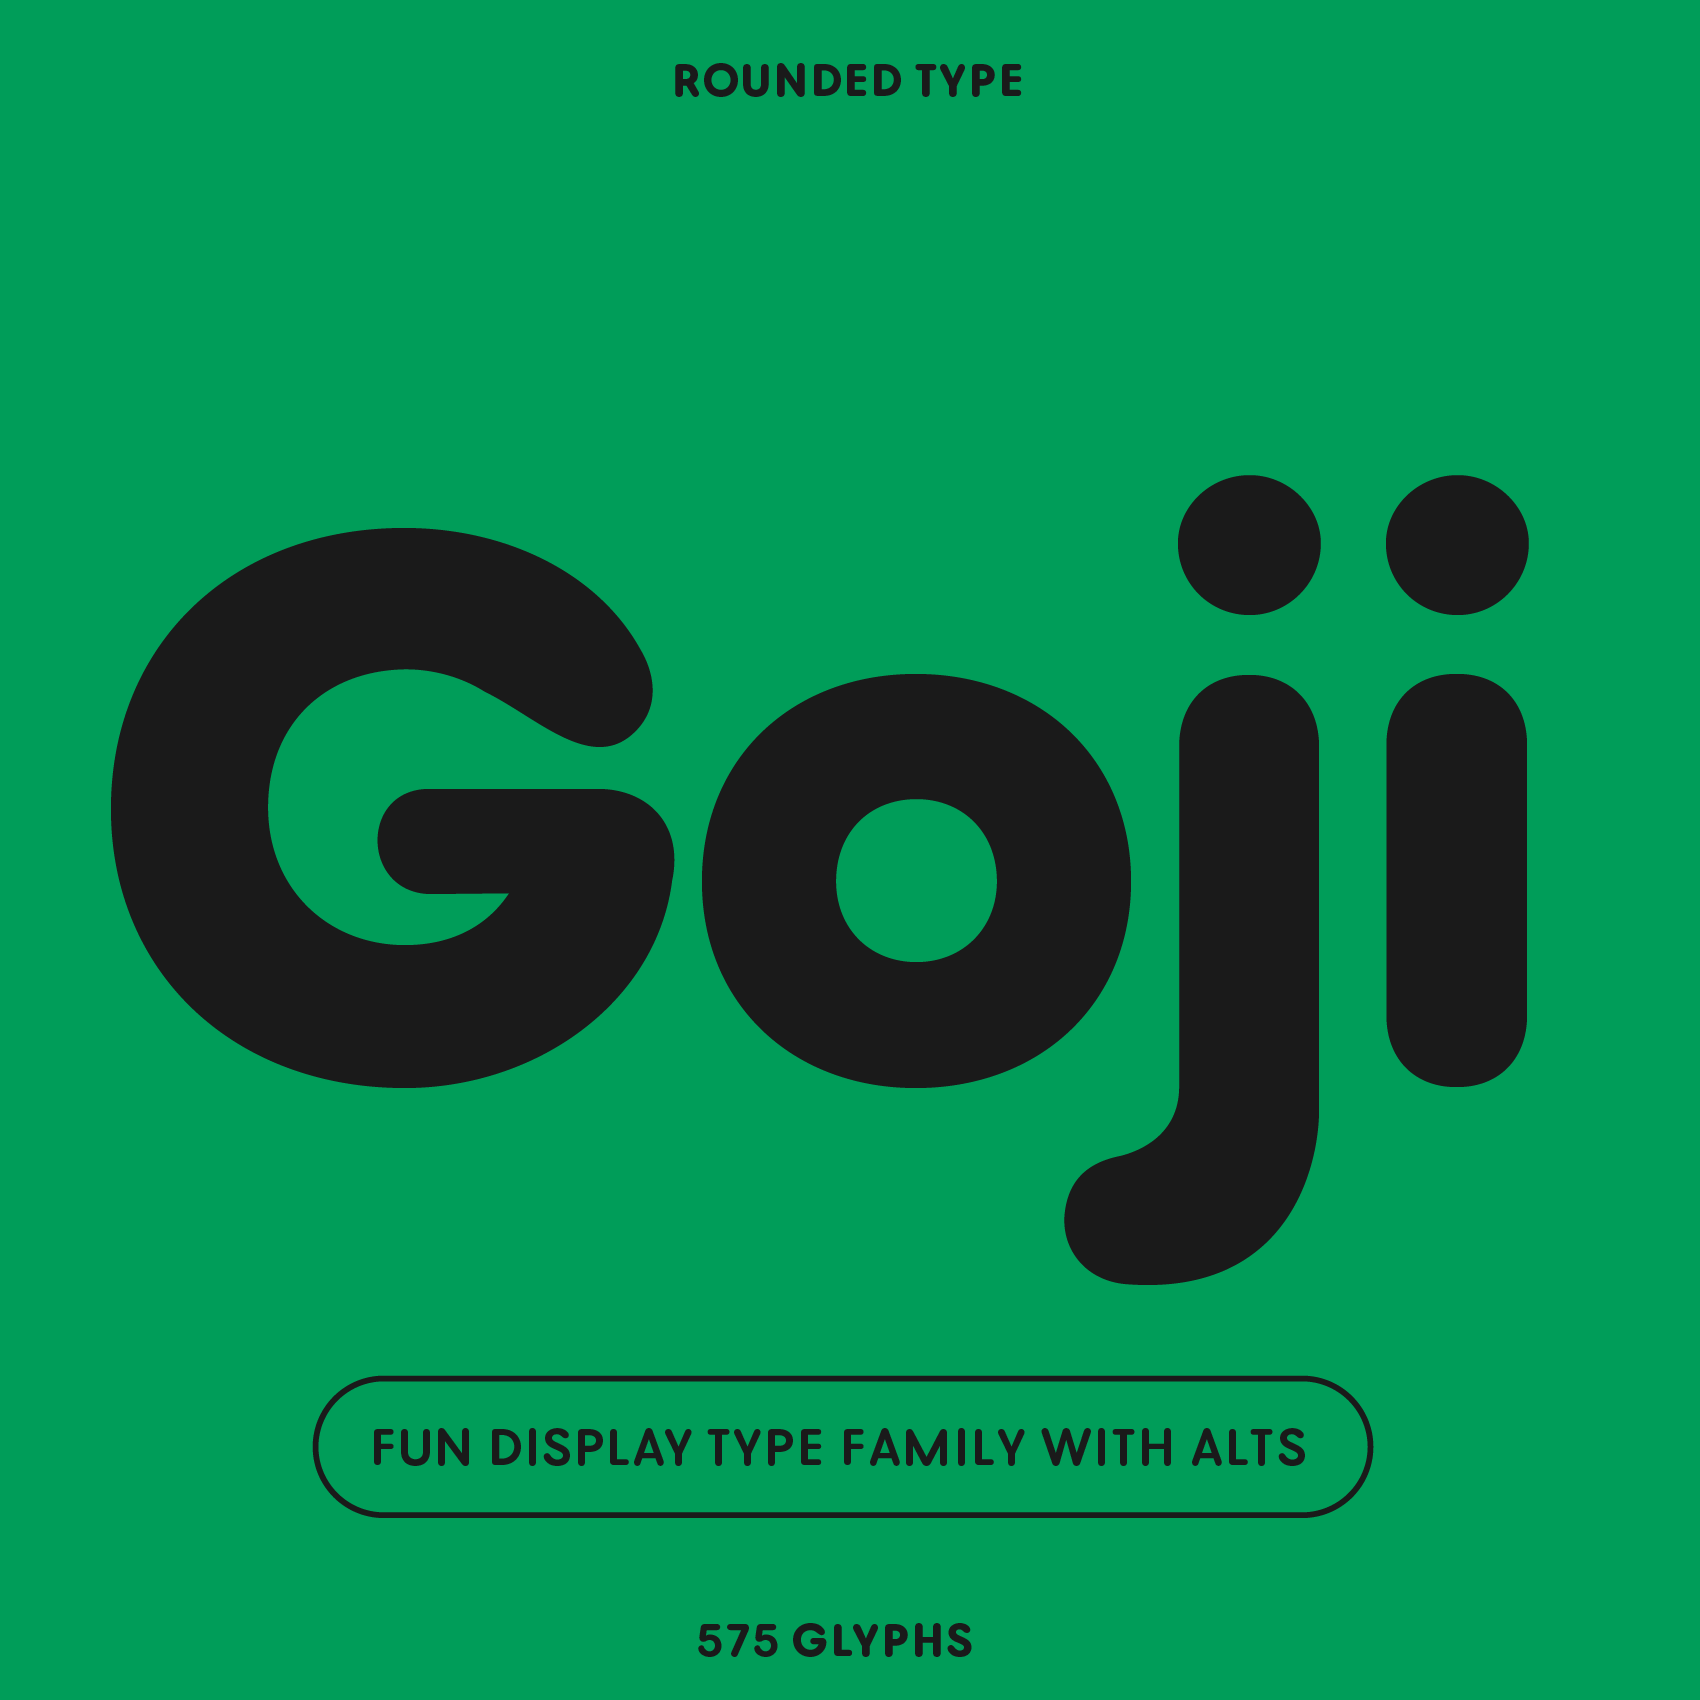 Goji, friendly, rounded font